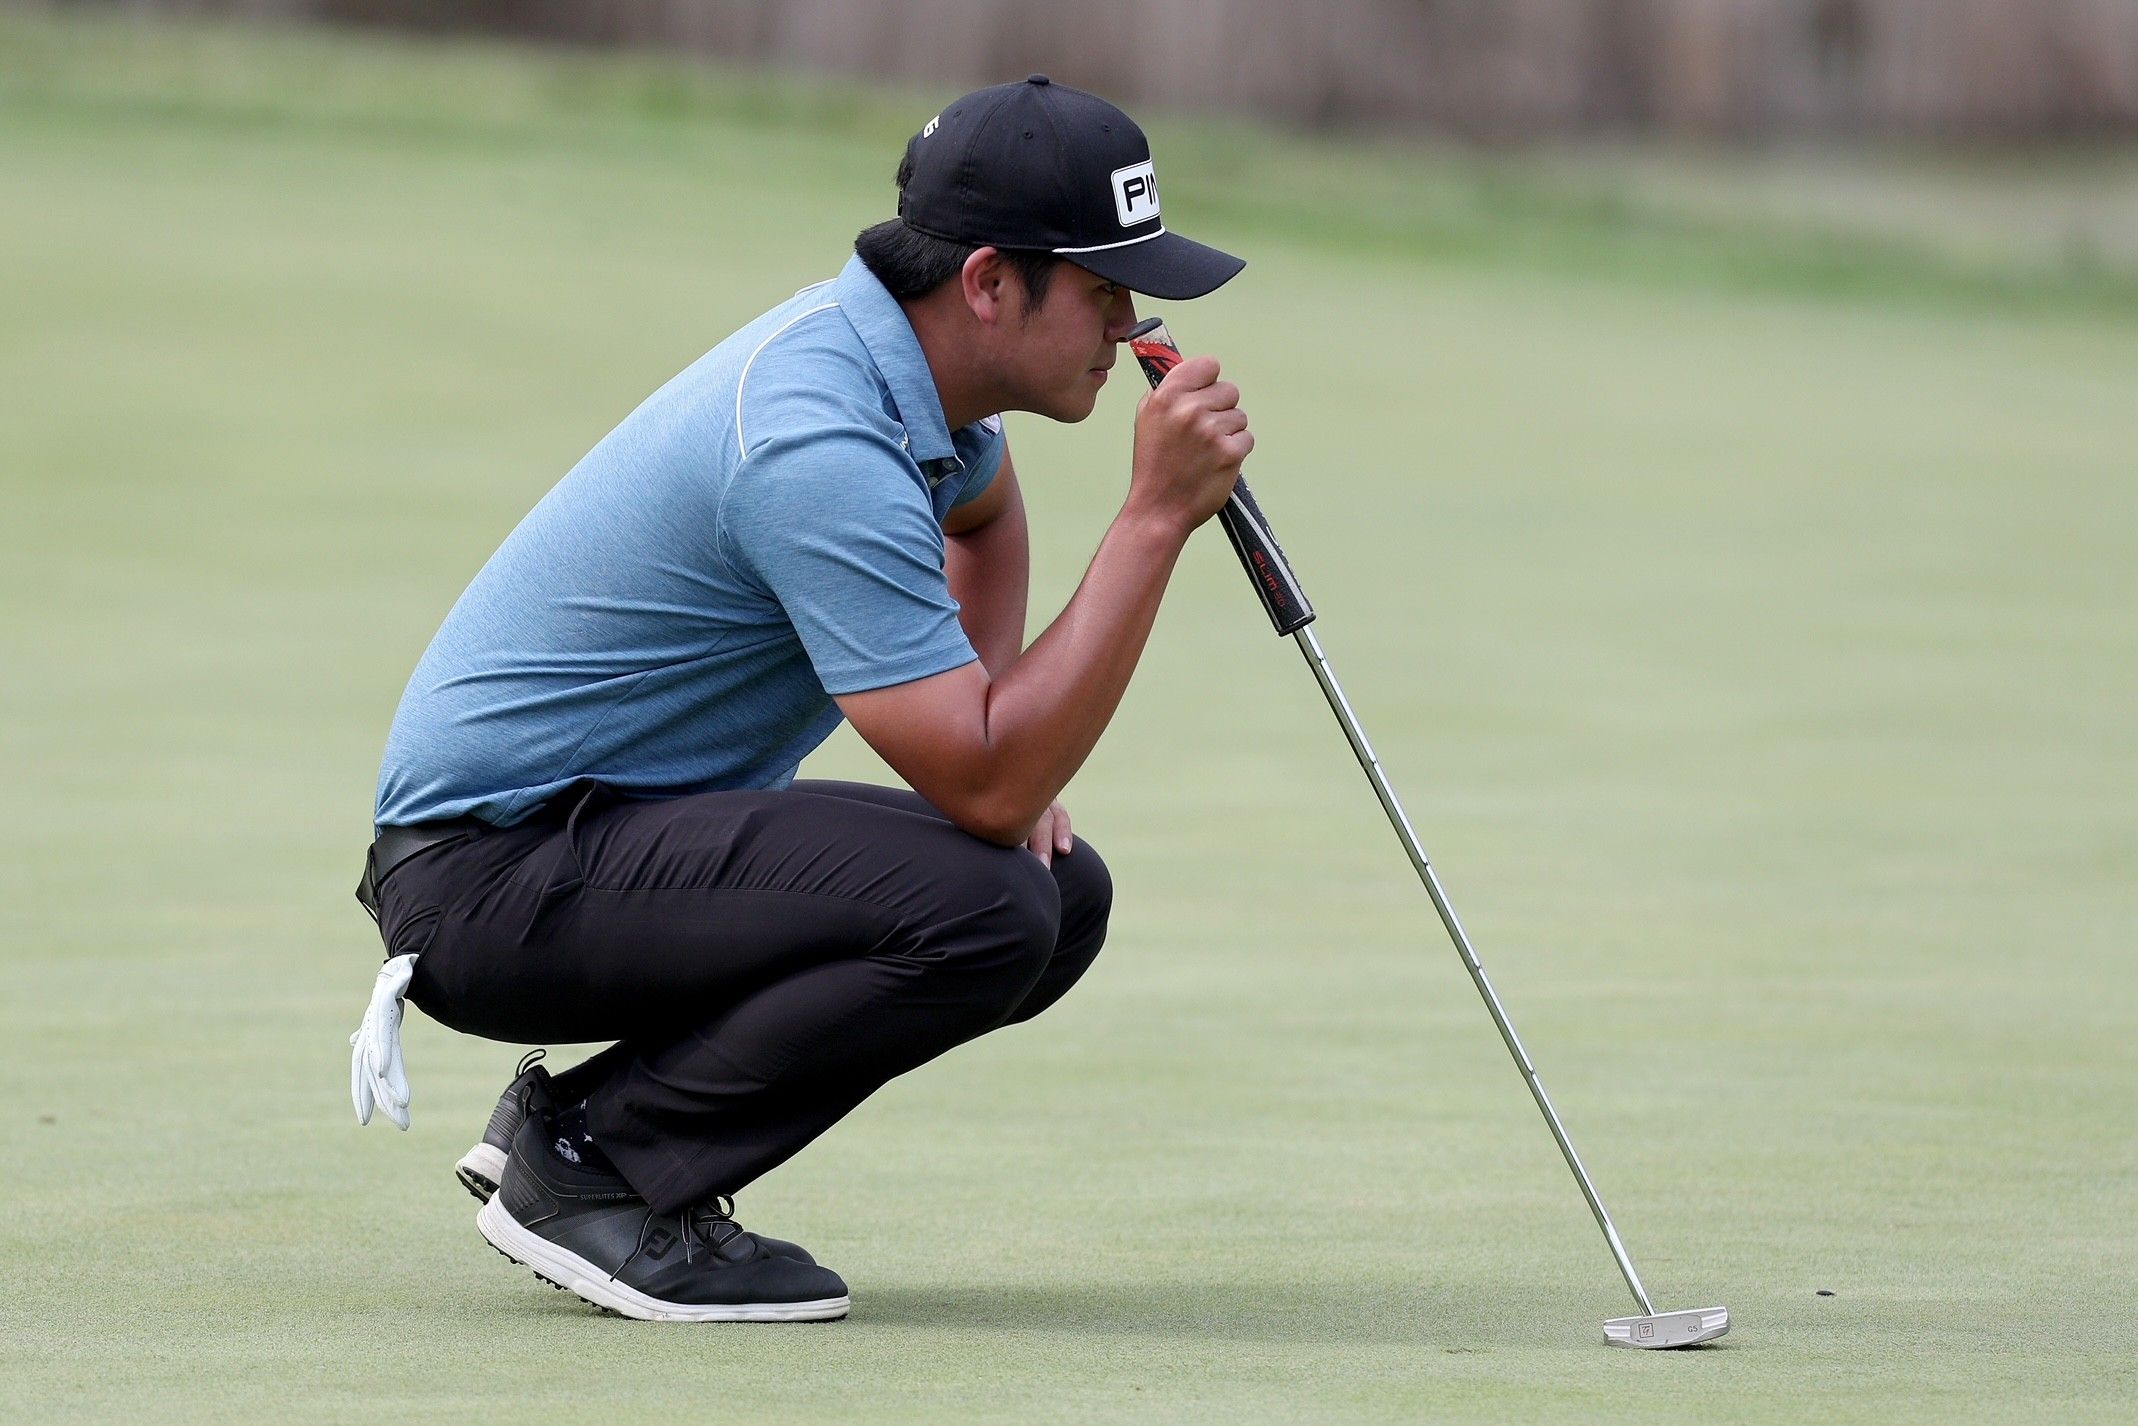 Quiban exits in PGA Tour debut but vows to come back